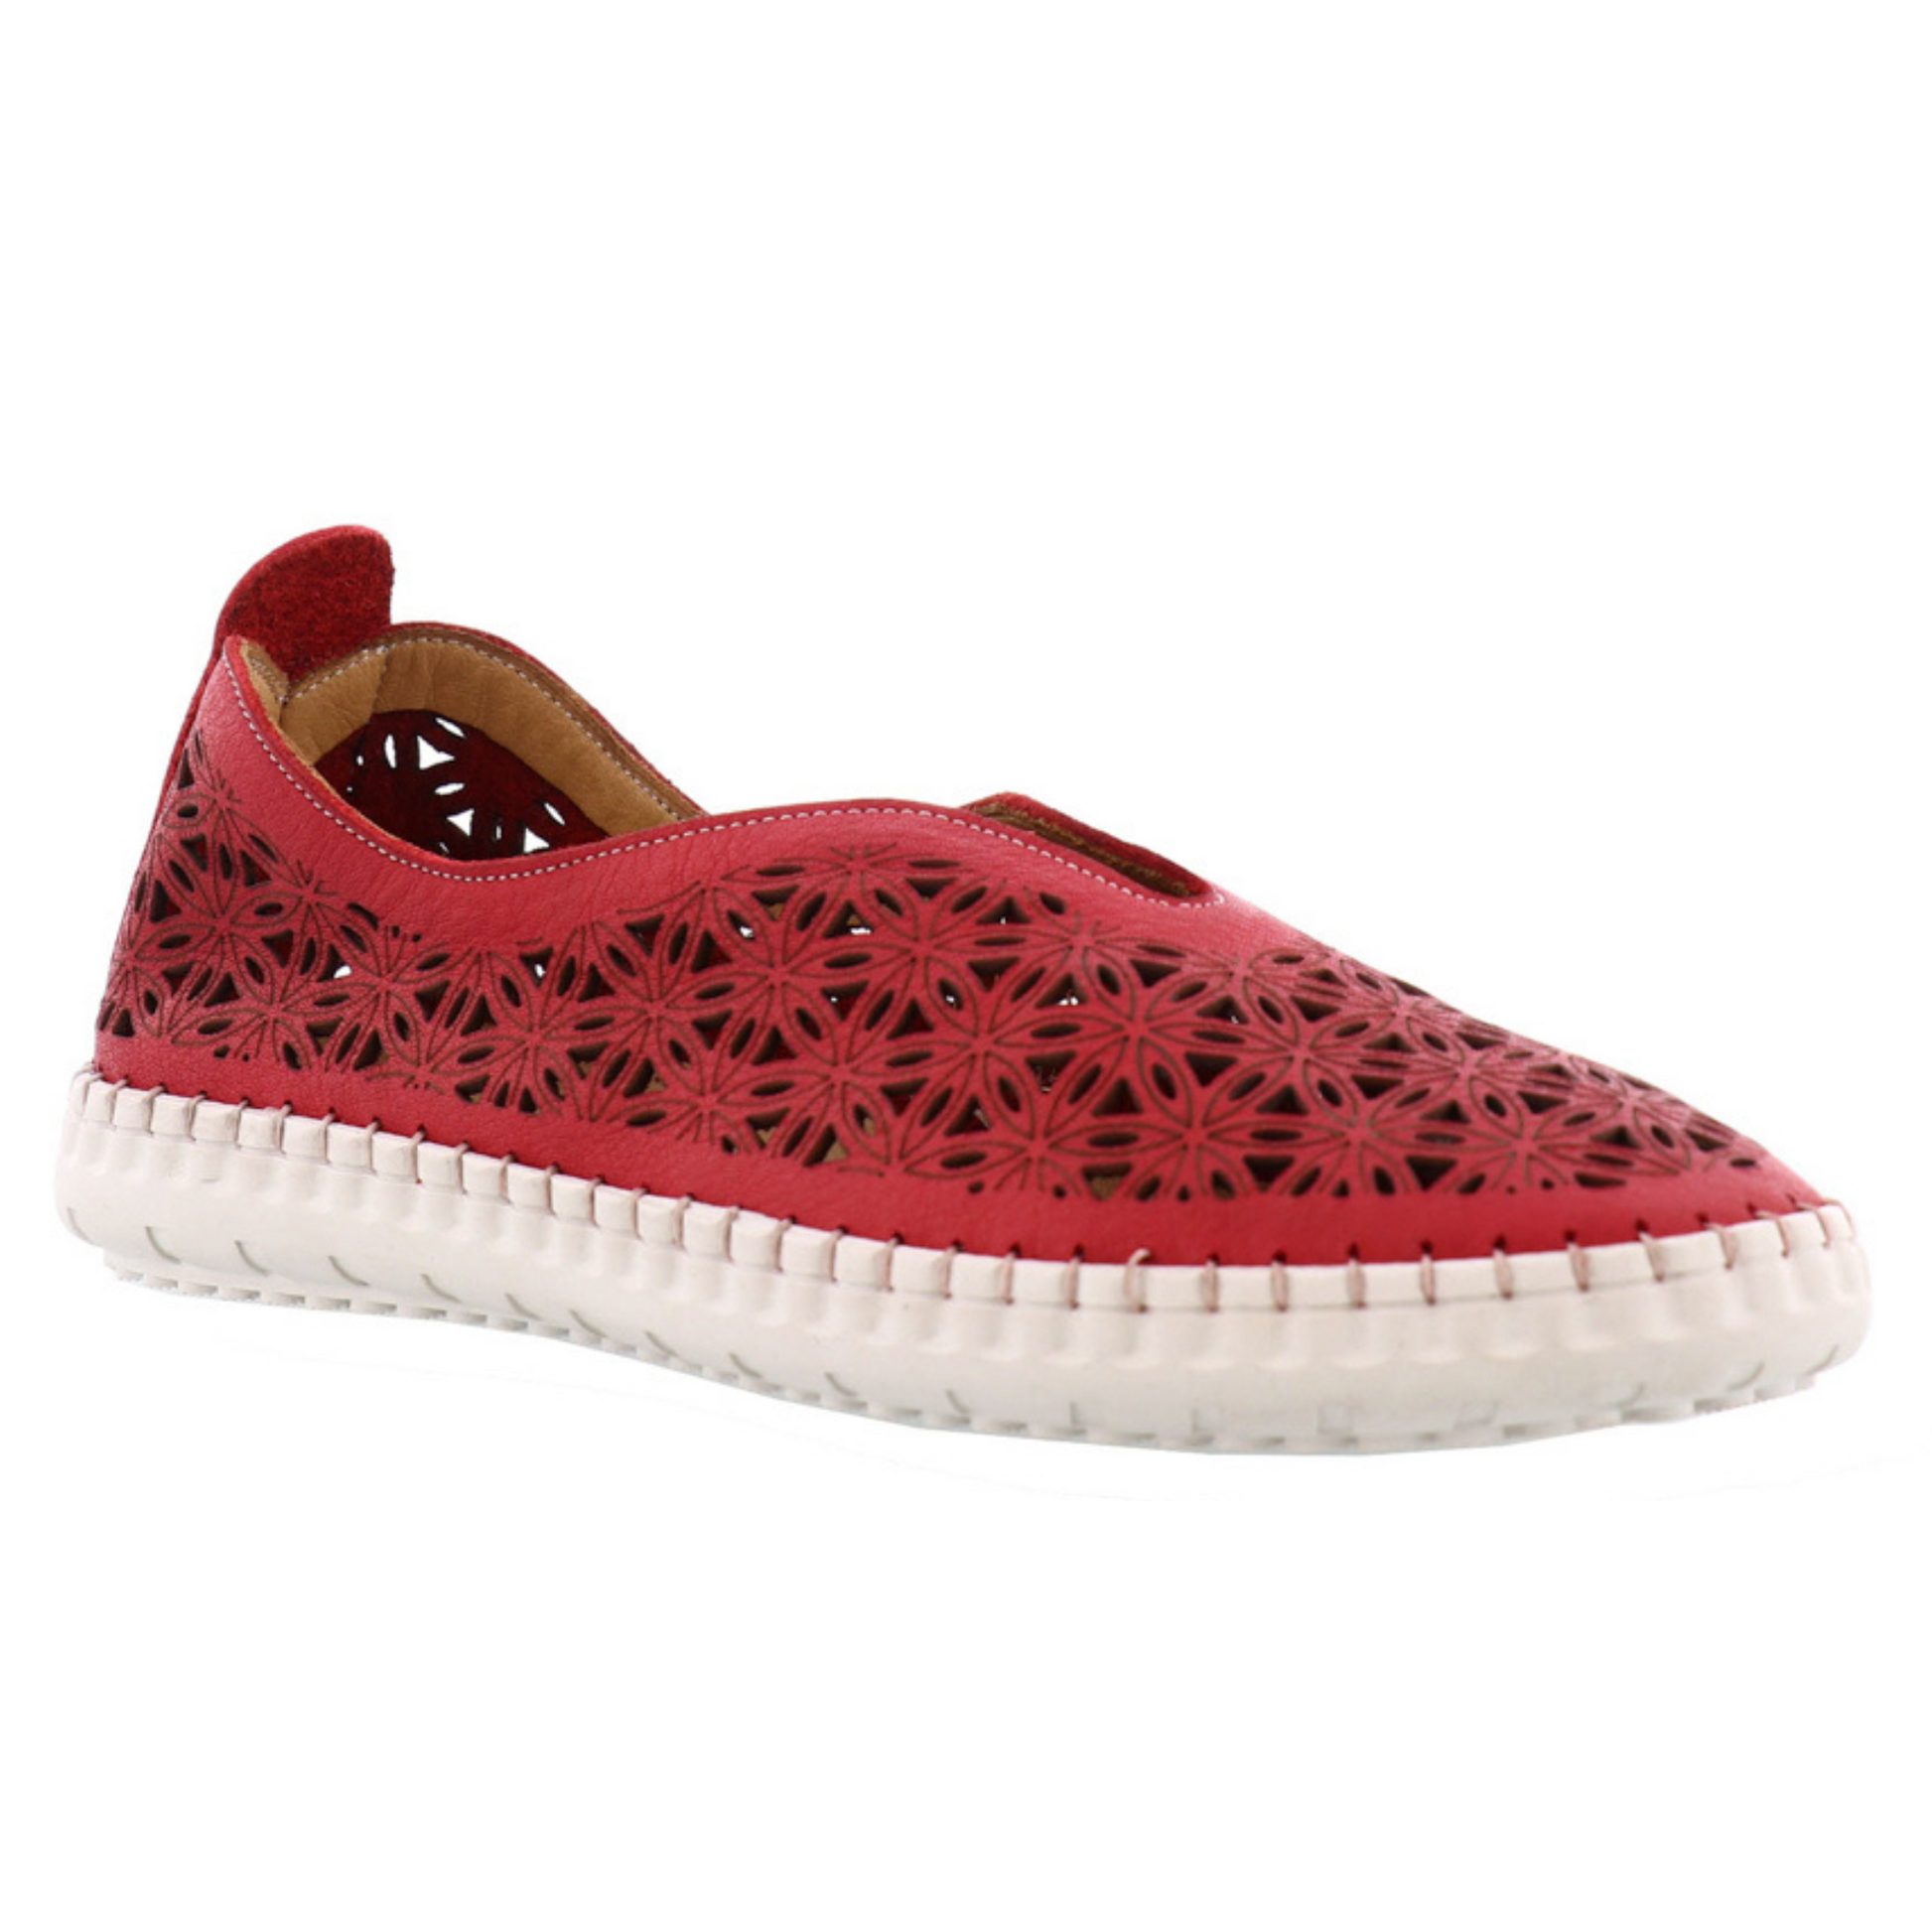 A red slip on shoe with deep topline, flower petal perforated pattern, and white sole is pictured at an angle.